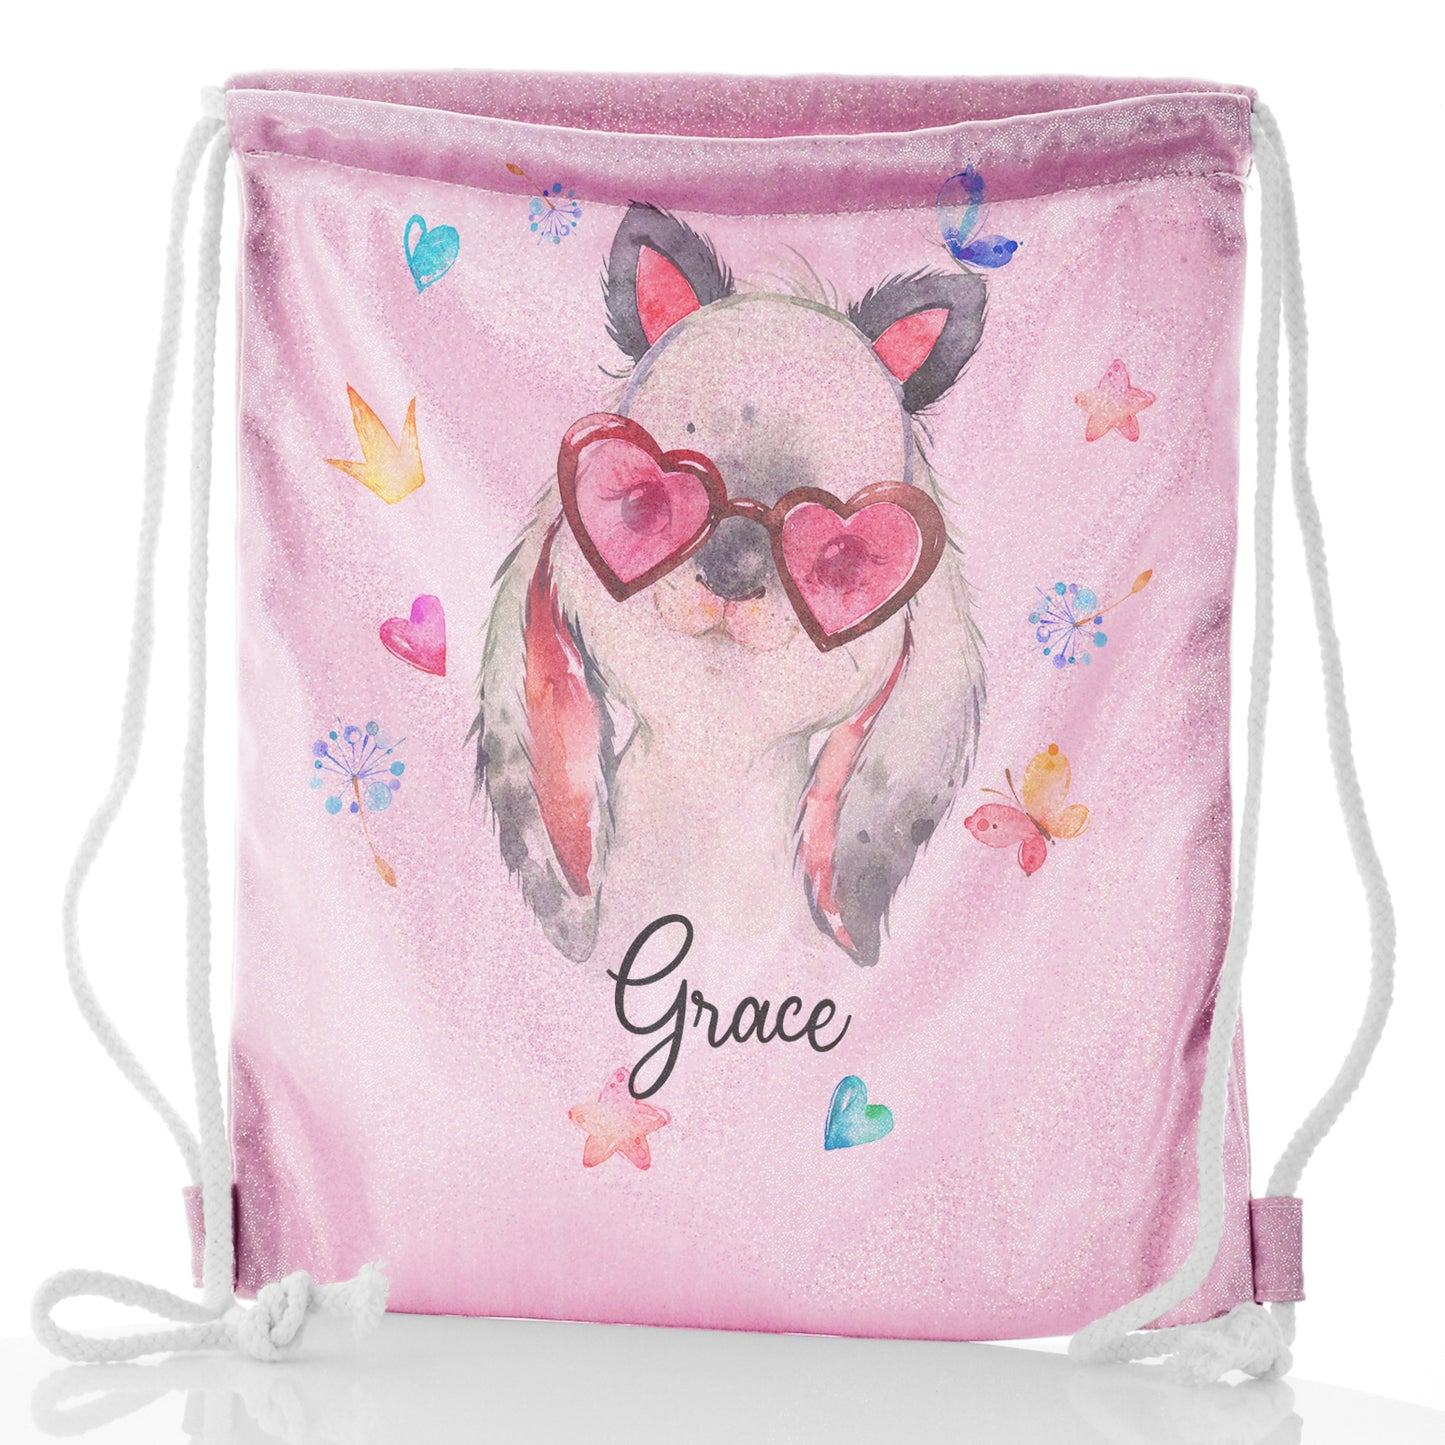 Personalised Glitter Drawstring Backpack with Grey Rabbit with Cat ears and Pink Heart Glasses and Cute Text